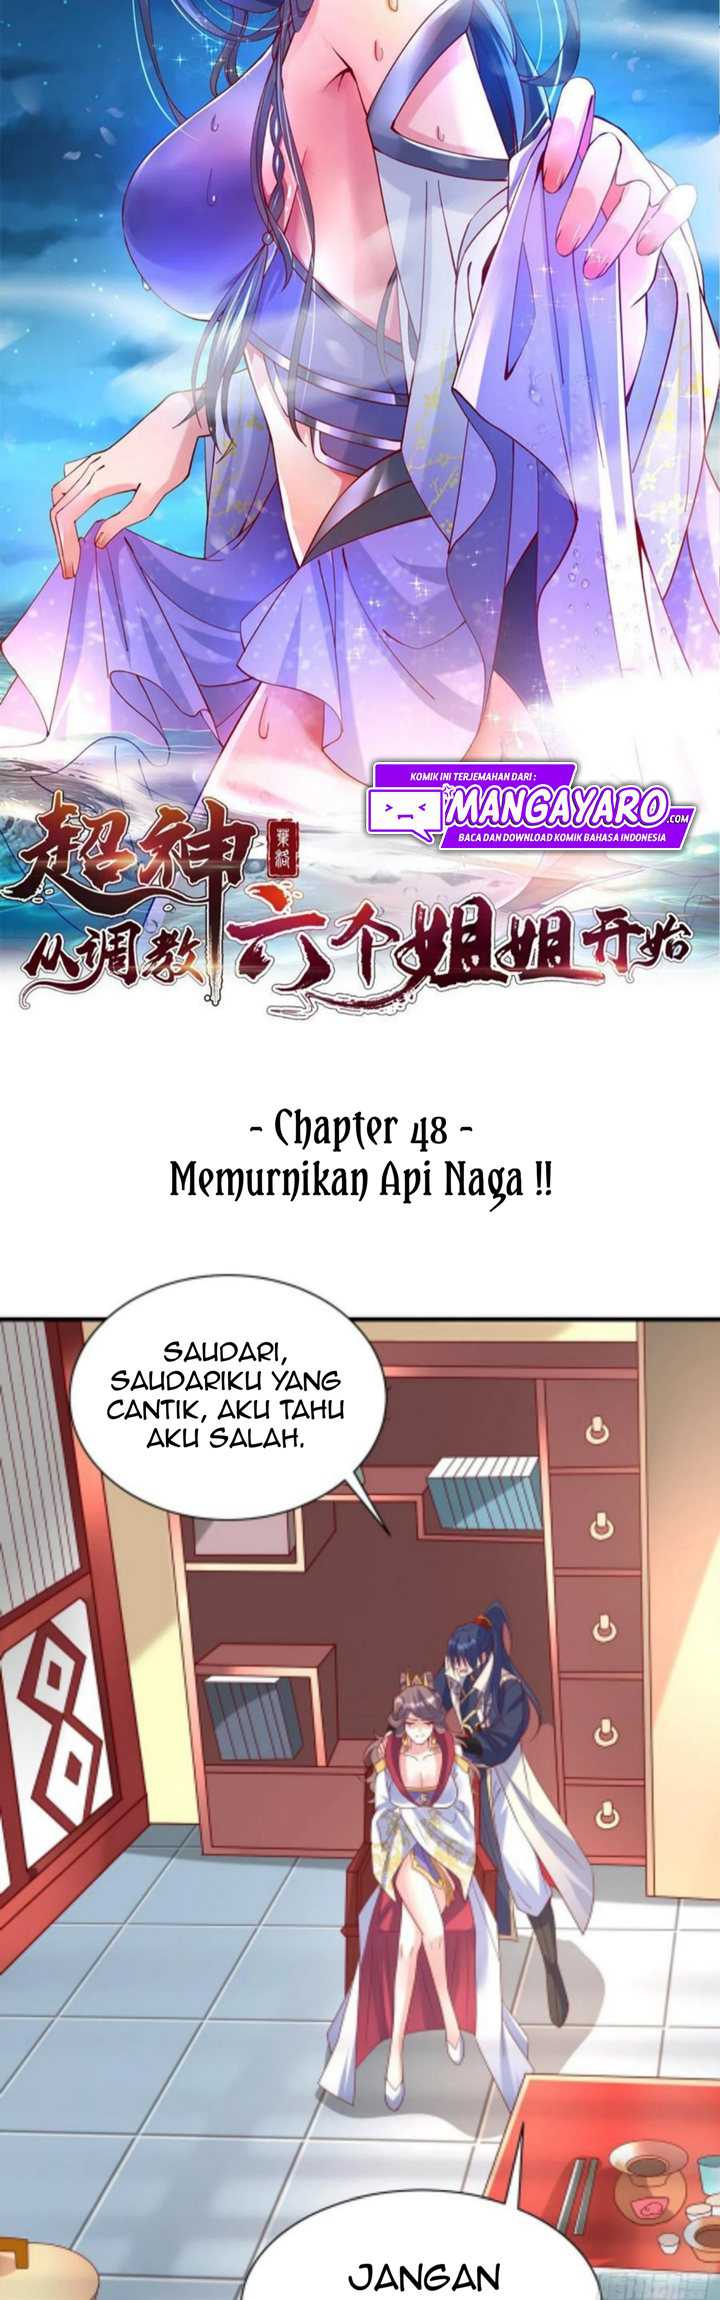 Becoming A God By Teaching Six Sisters Chapter 48 4